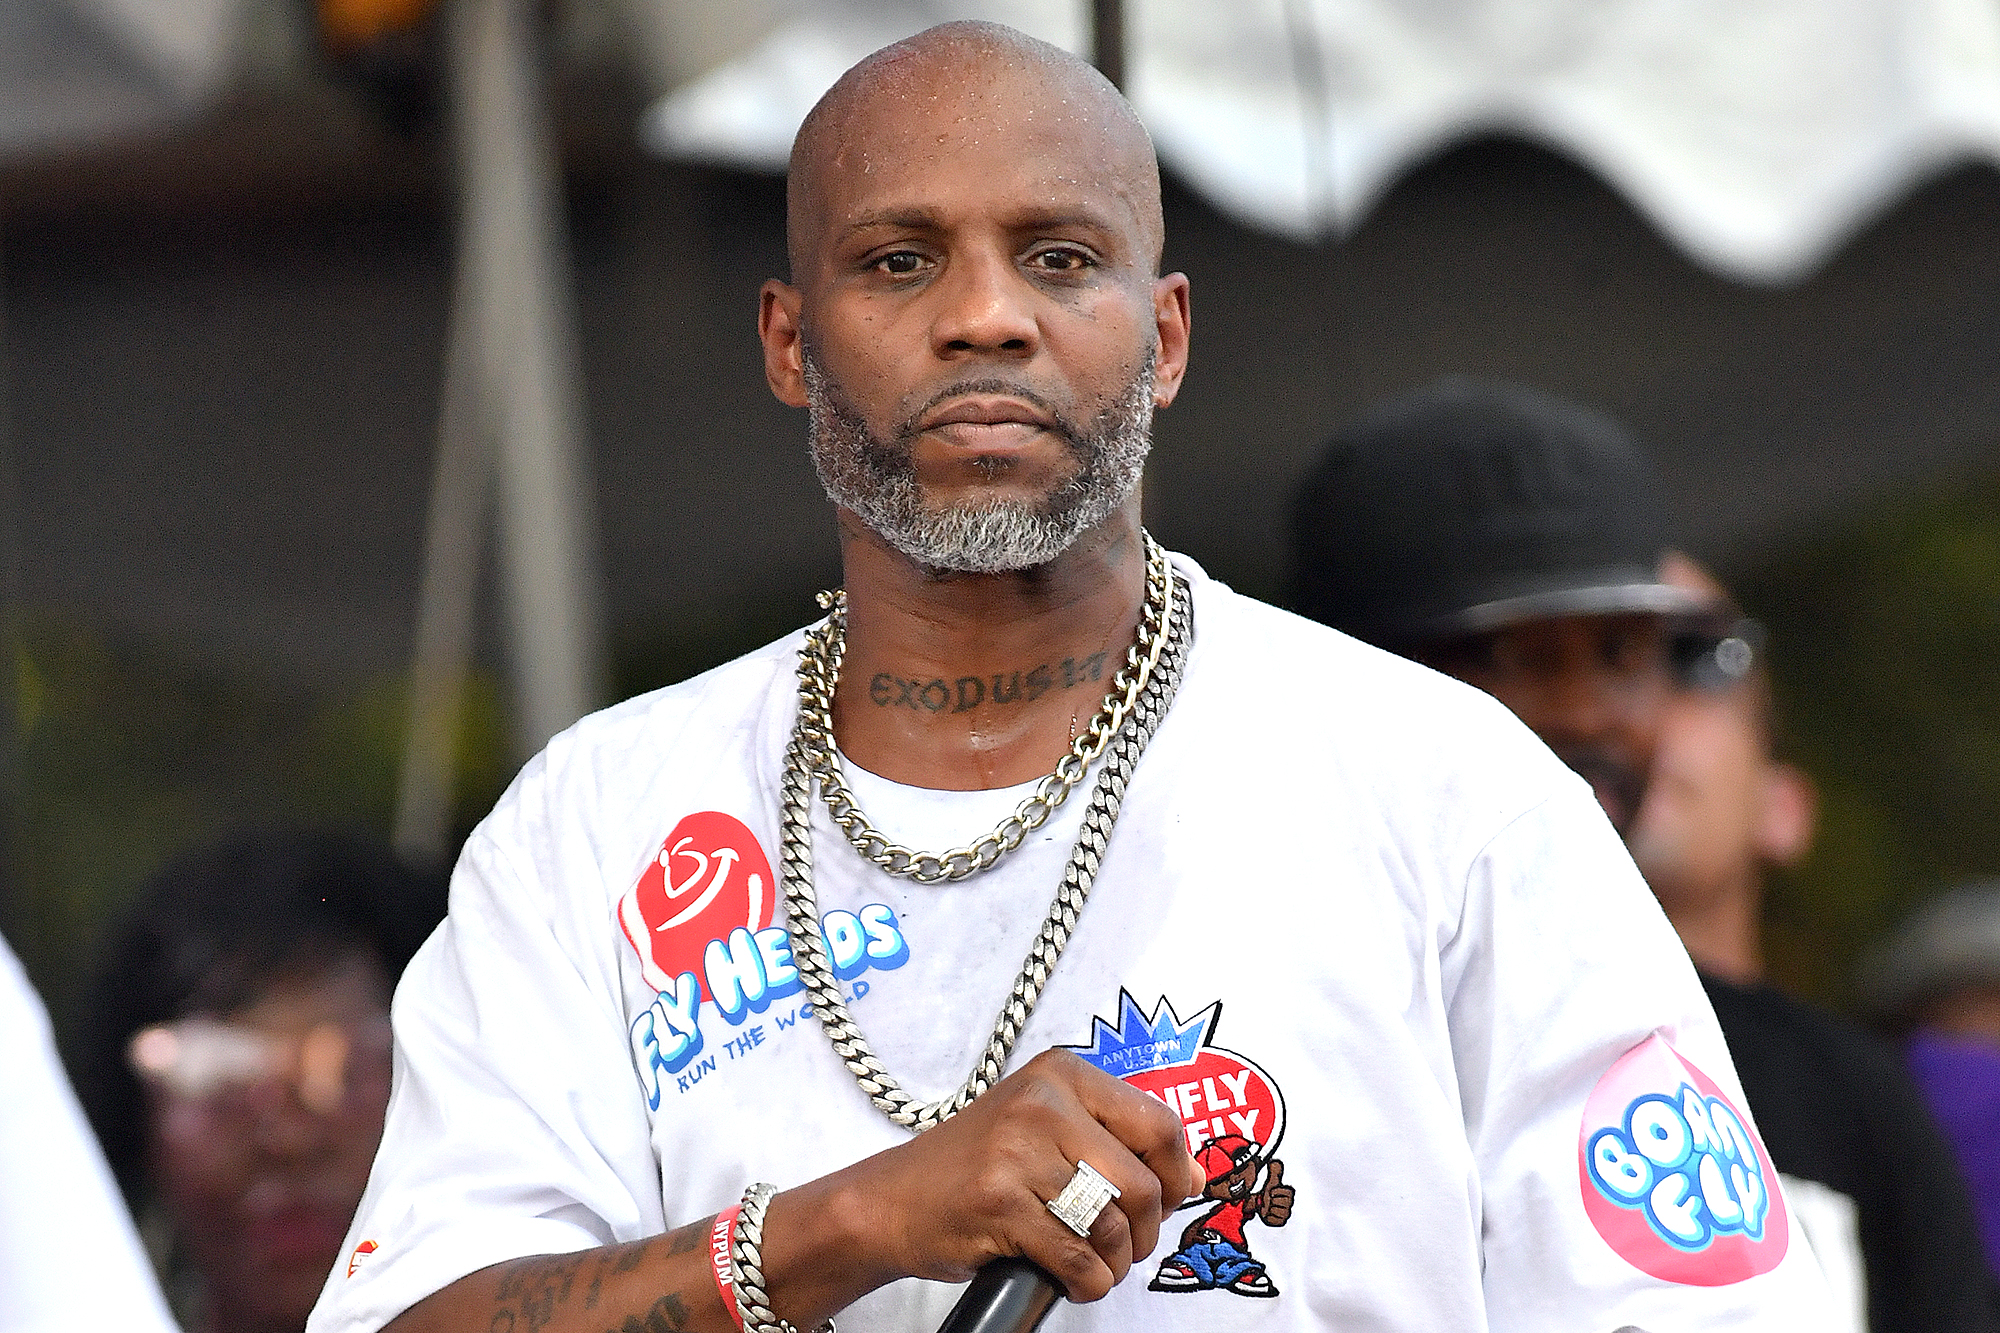 Rapper DMX has died at age 50 - People magazine